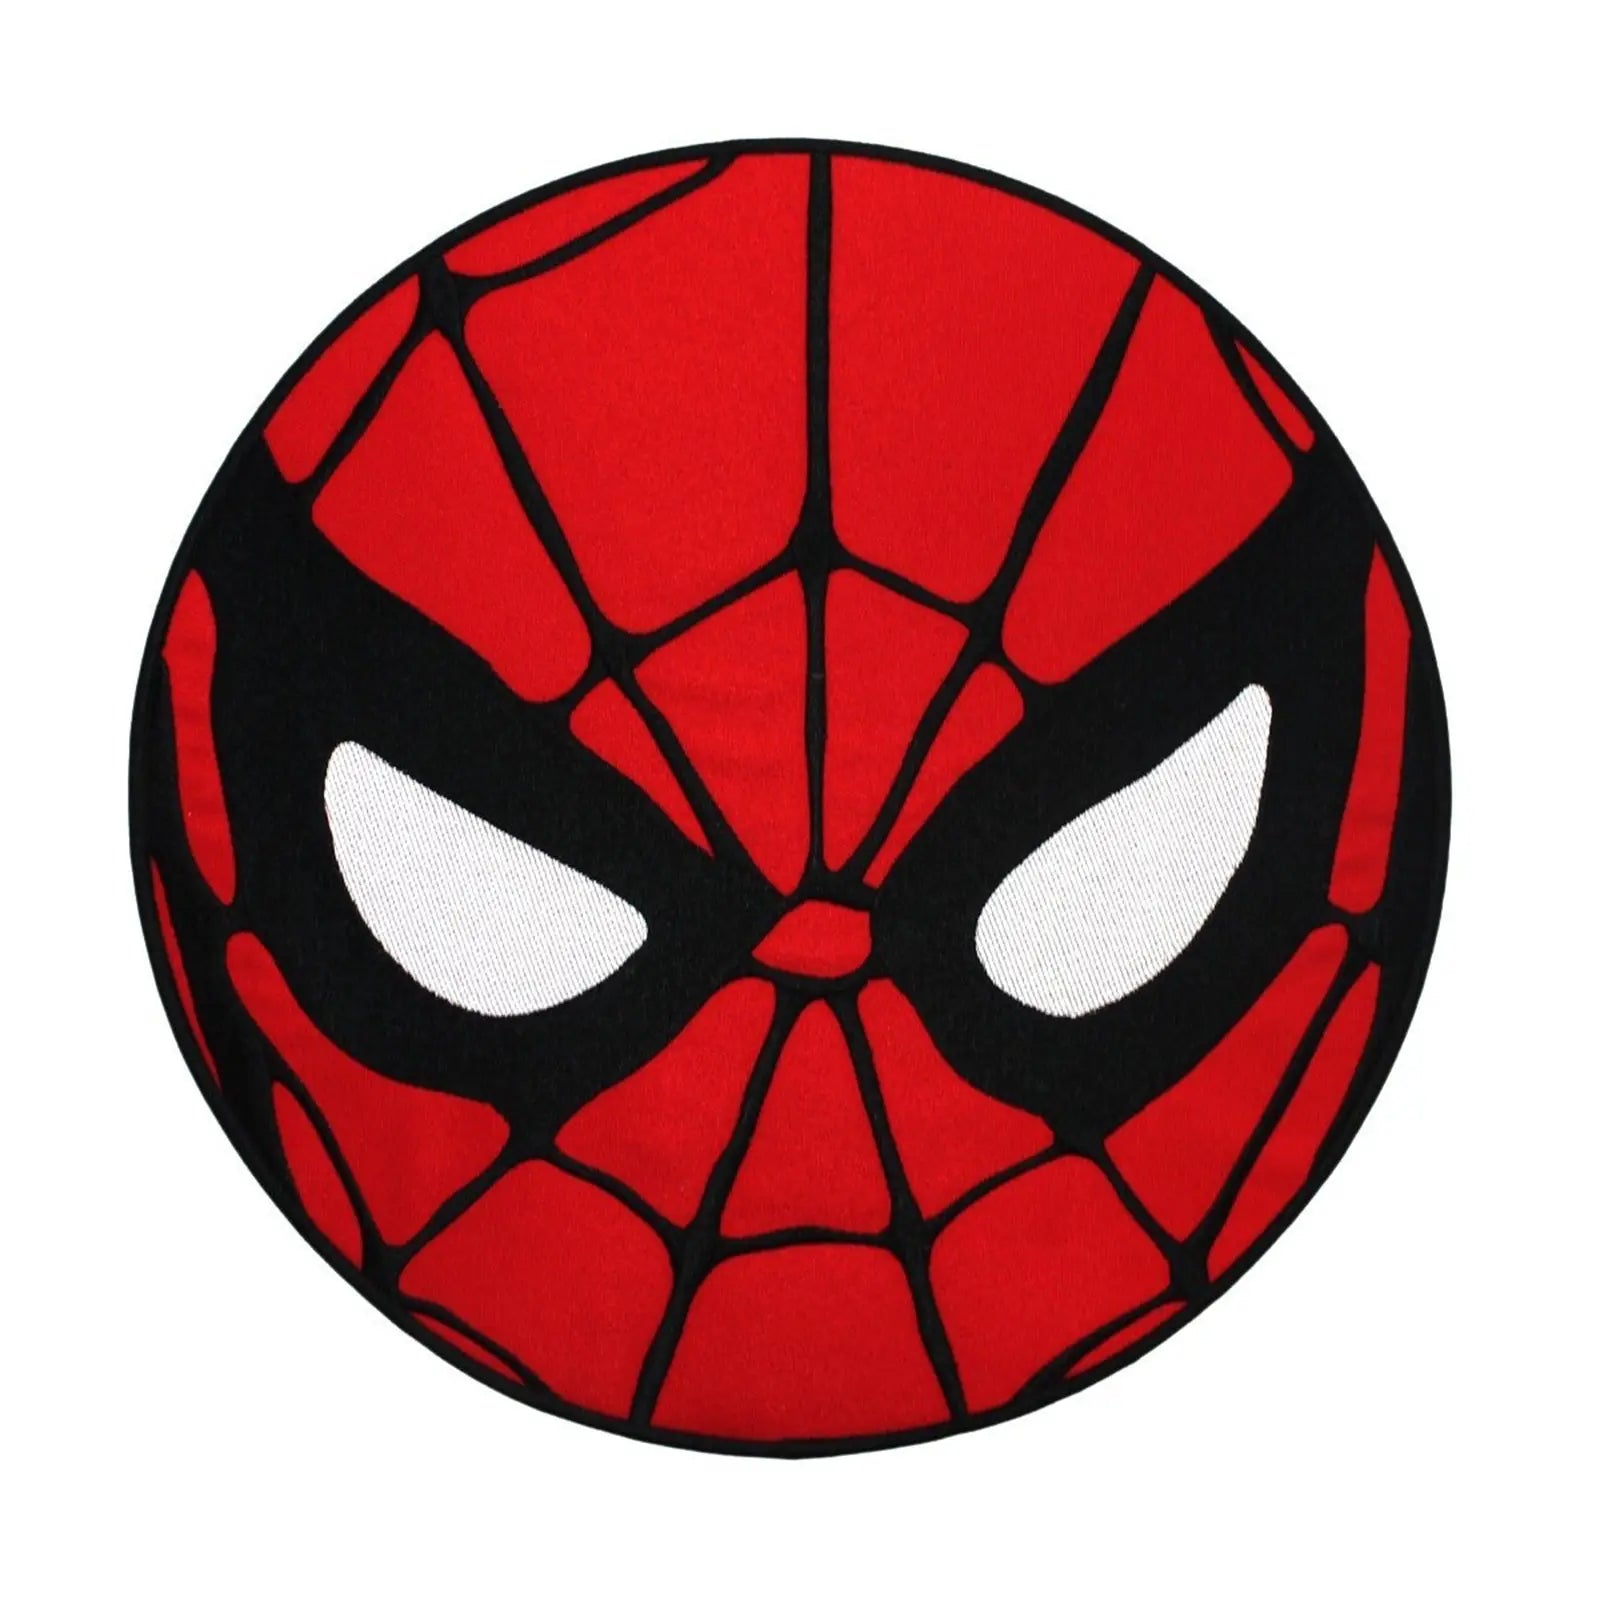 Marvel Spiderman Iron on Patches for Clothing Cartoon Thermal